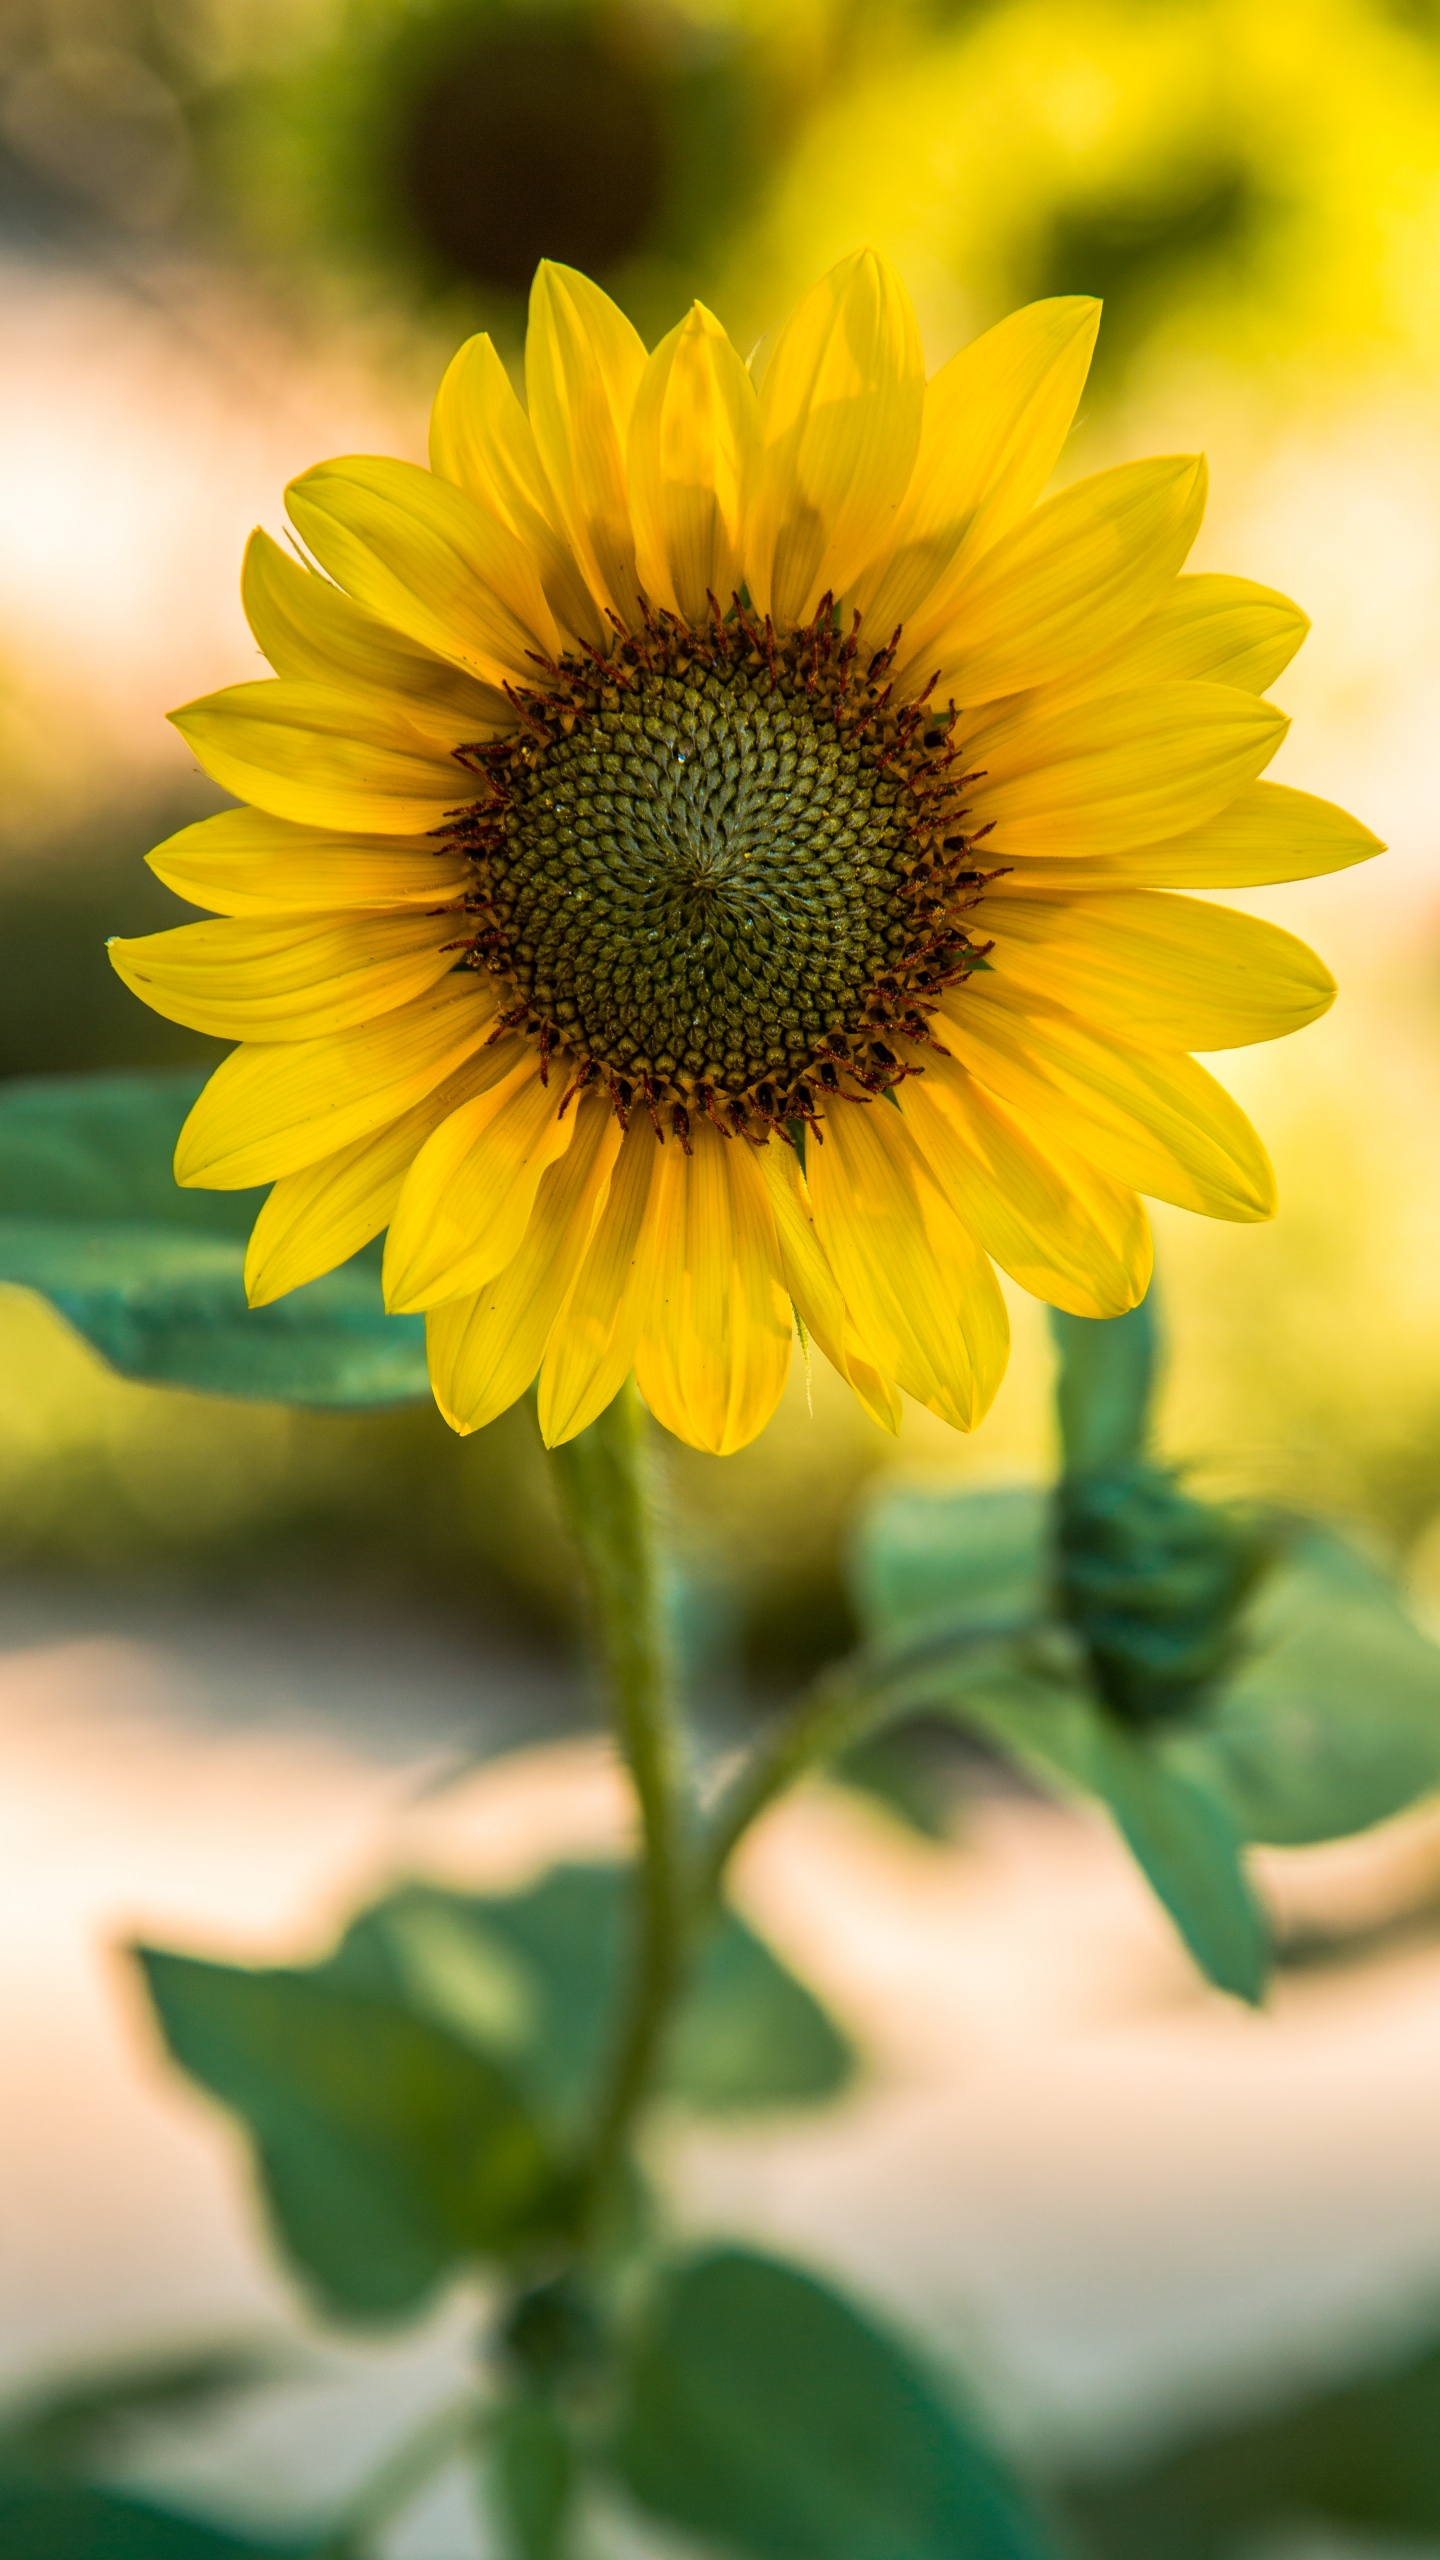 Yellow Sunflower in Close up Photography. Wallpaper in 1440x2560 Resolution